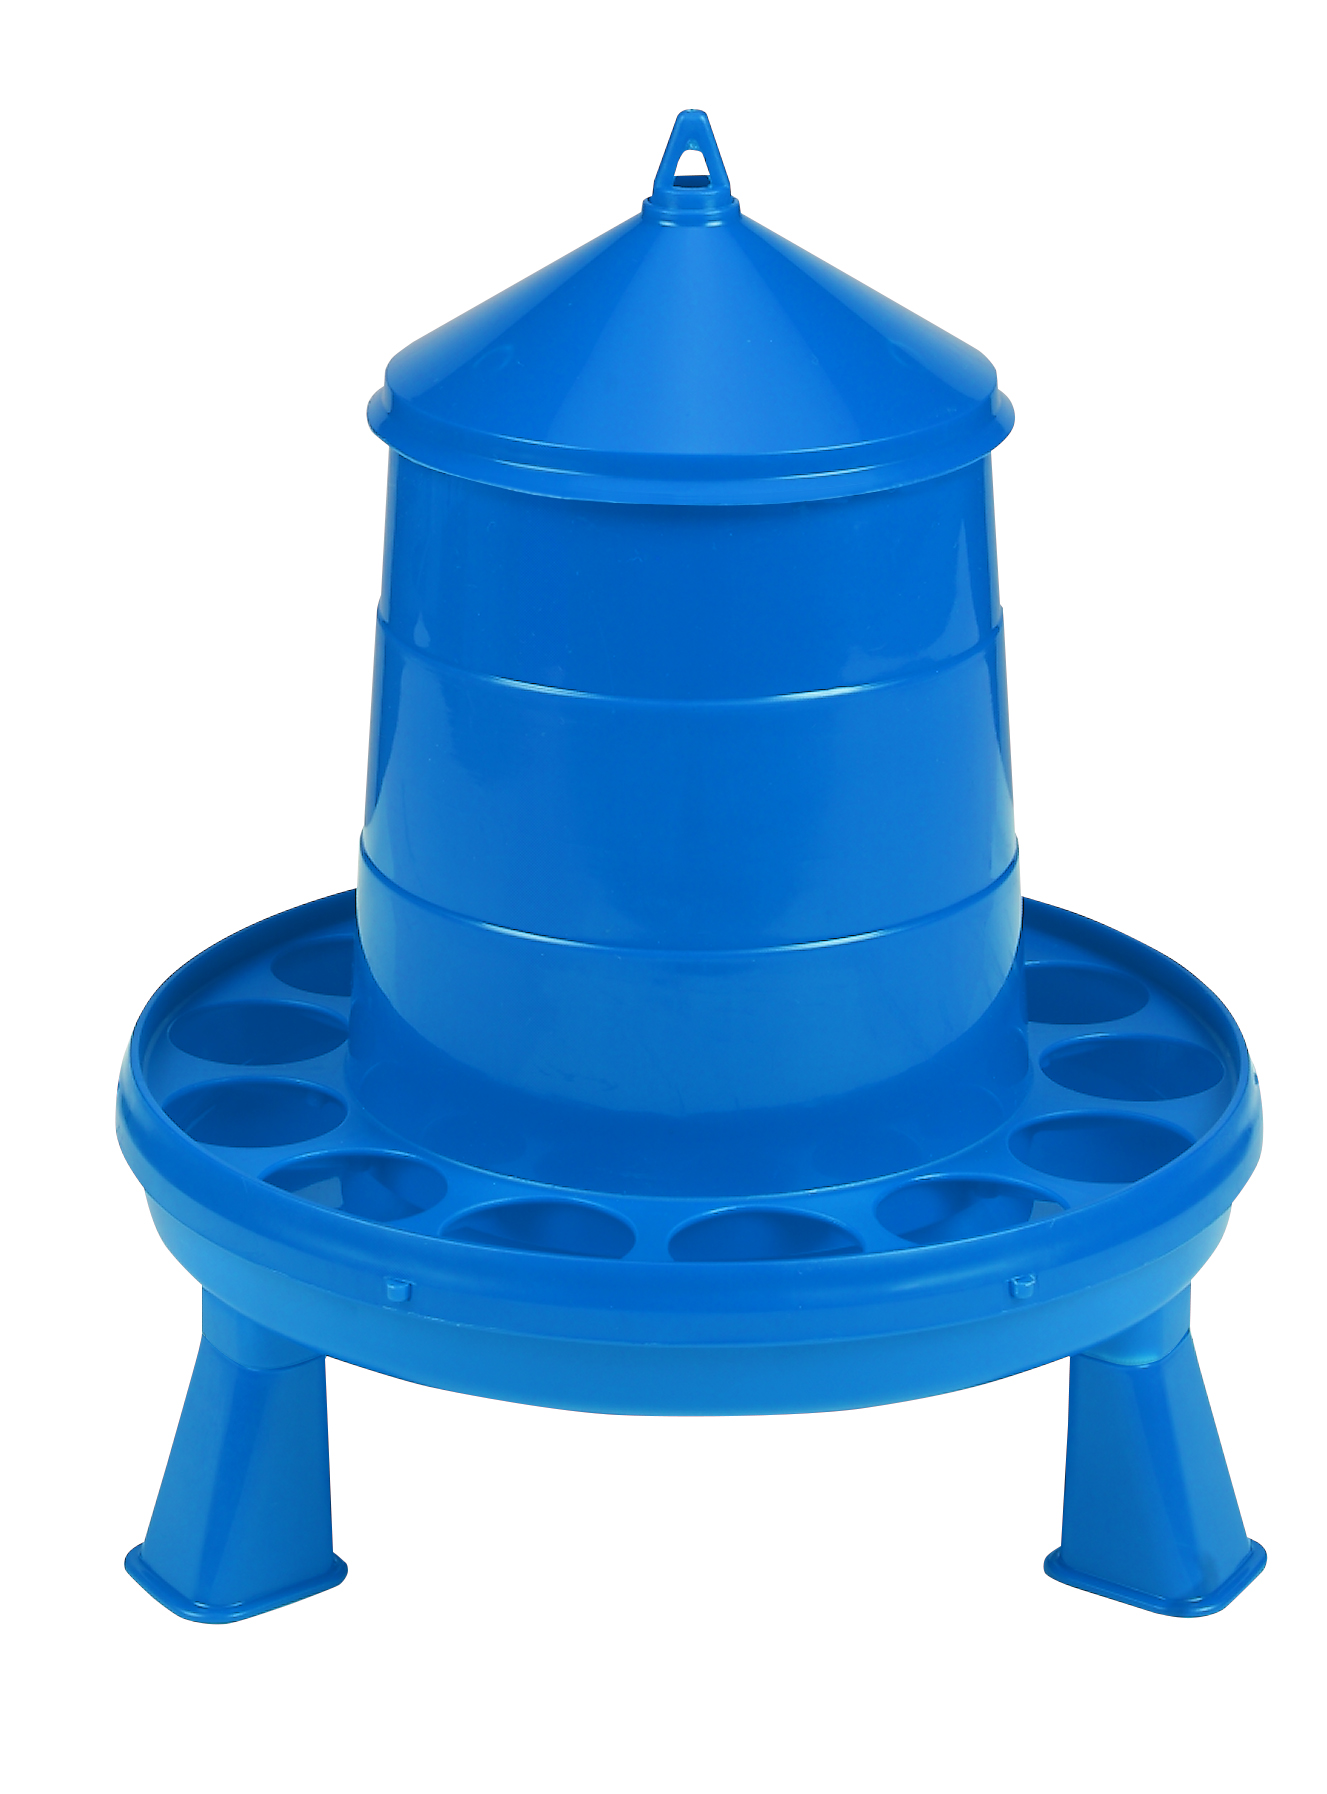 Double-Tuf Poultry Feeder with Legs, 4 lb.